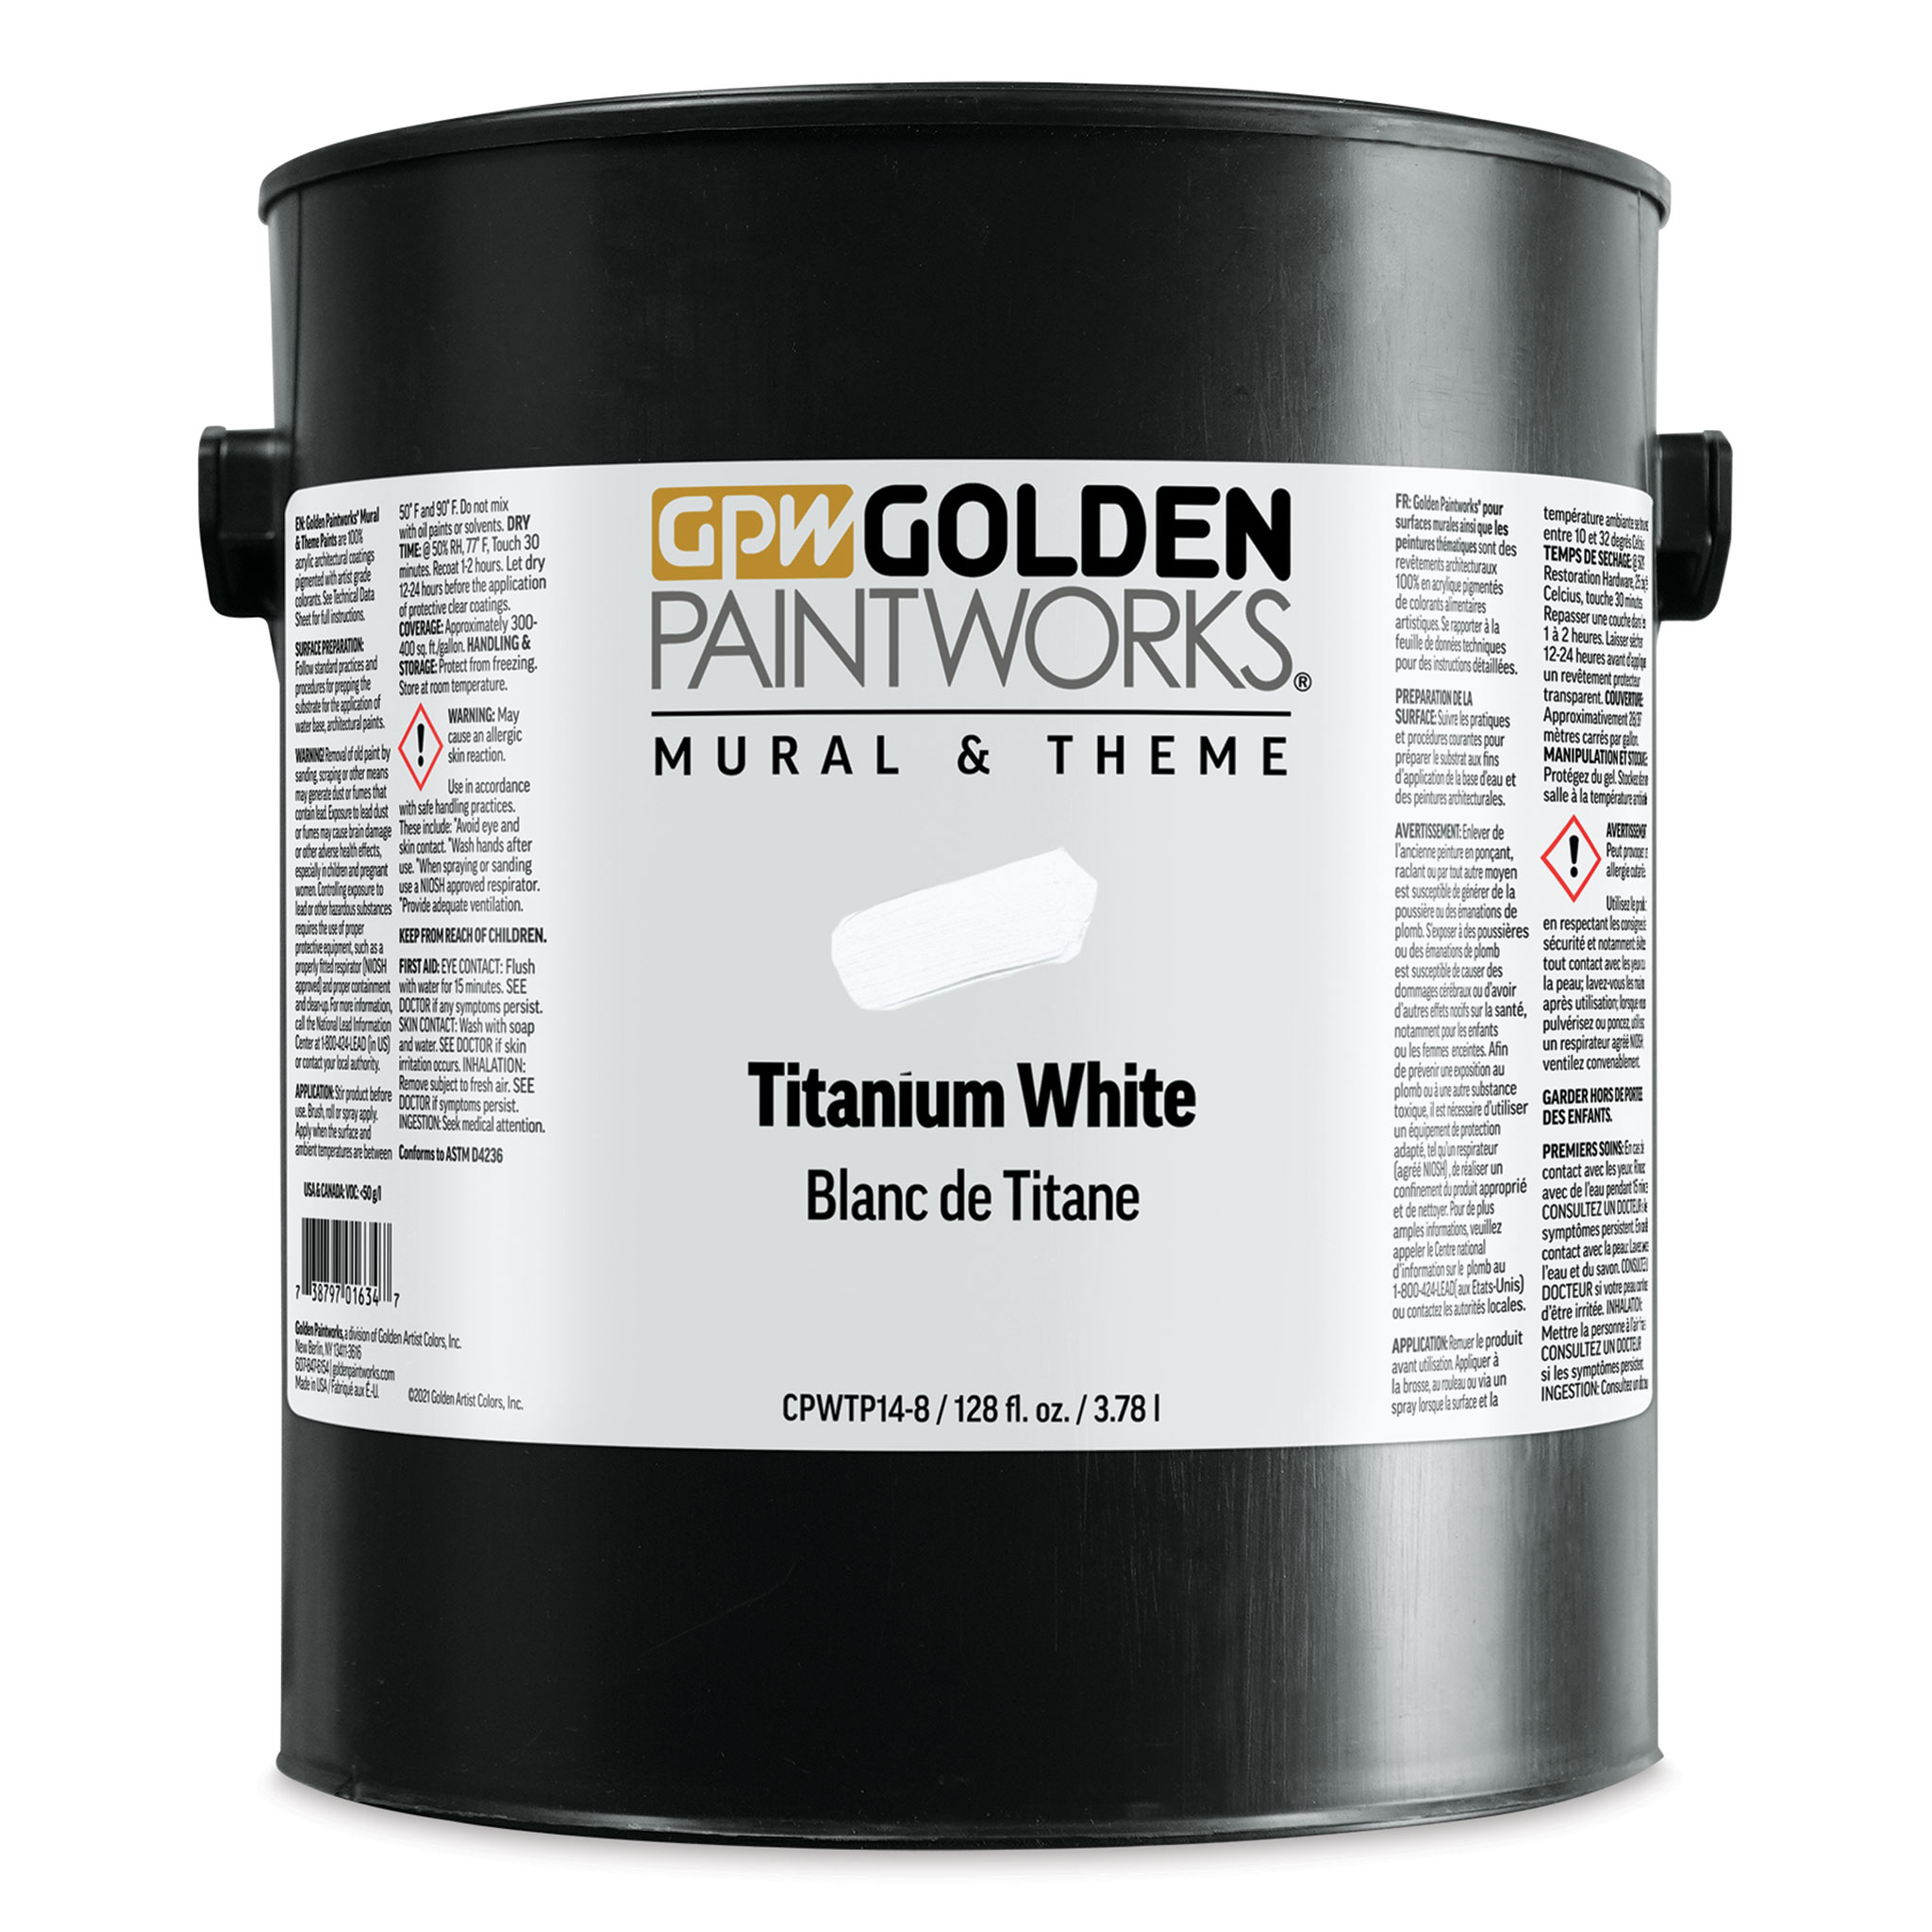 Golden Paintworks Mural and Theme Acrylic Paint - Pyrrole Red, 16